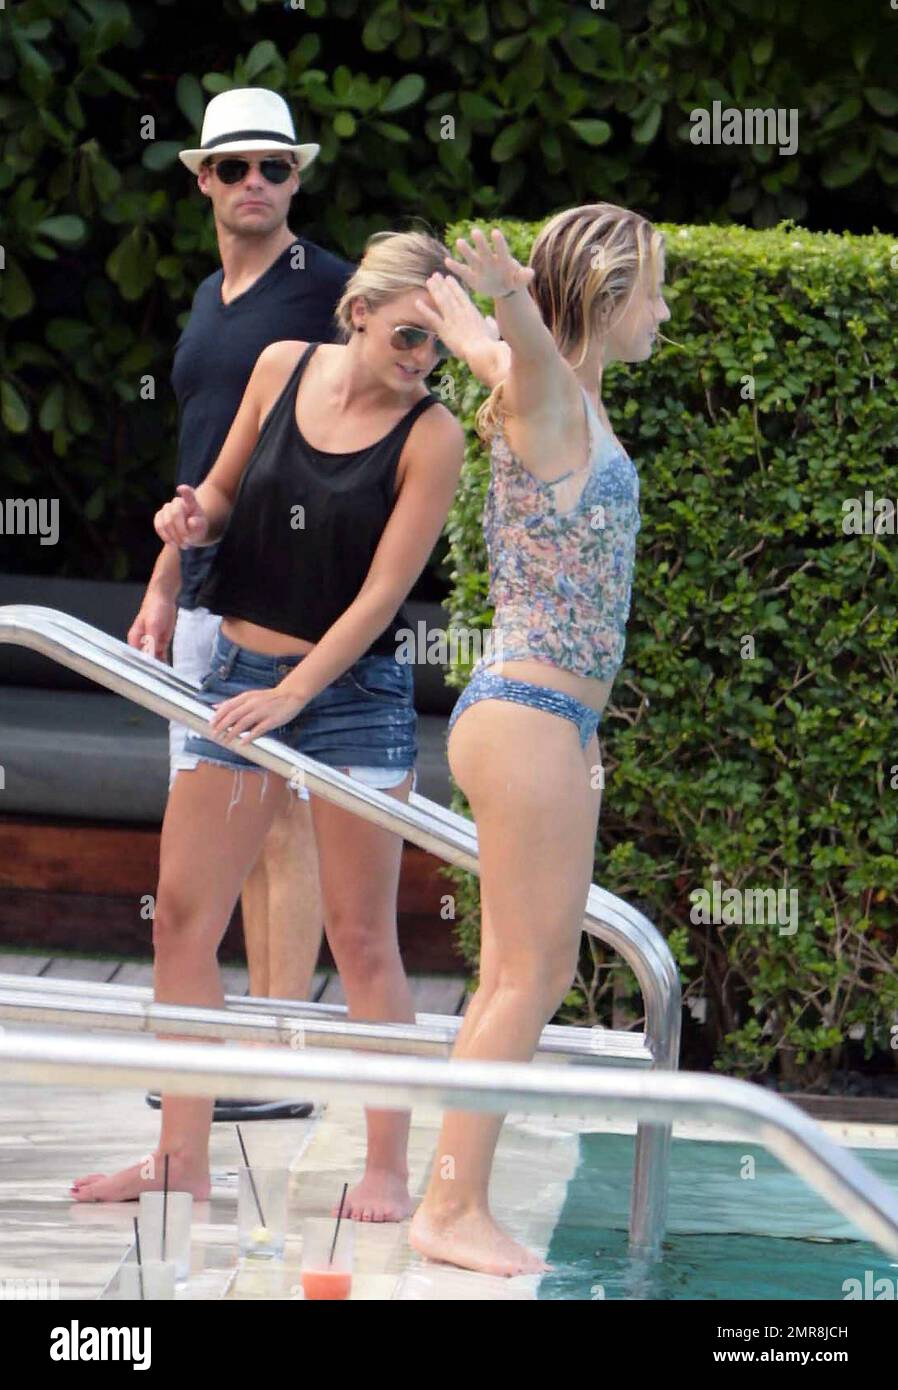 Julianne Hough, spends an early birthday weekend with her boyfriend Ryan Seacrest, brother Derek Hough, mother Mari Anne and best friend Maude who all flew into Miami to be with the actress who is currently filming Rock Of Ages. Julianne wore a blue bikini to take a dip in the hotel pool and also ventured into the ocean with the group who all appeared to be having a great time. Julianne will turn 23 on Wednesday. Miami Beach, FL. 7/16/11. Stock Photo